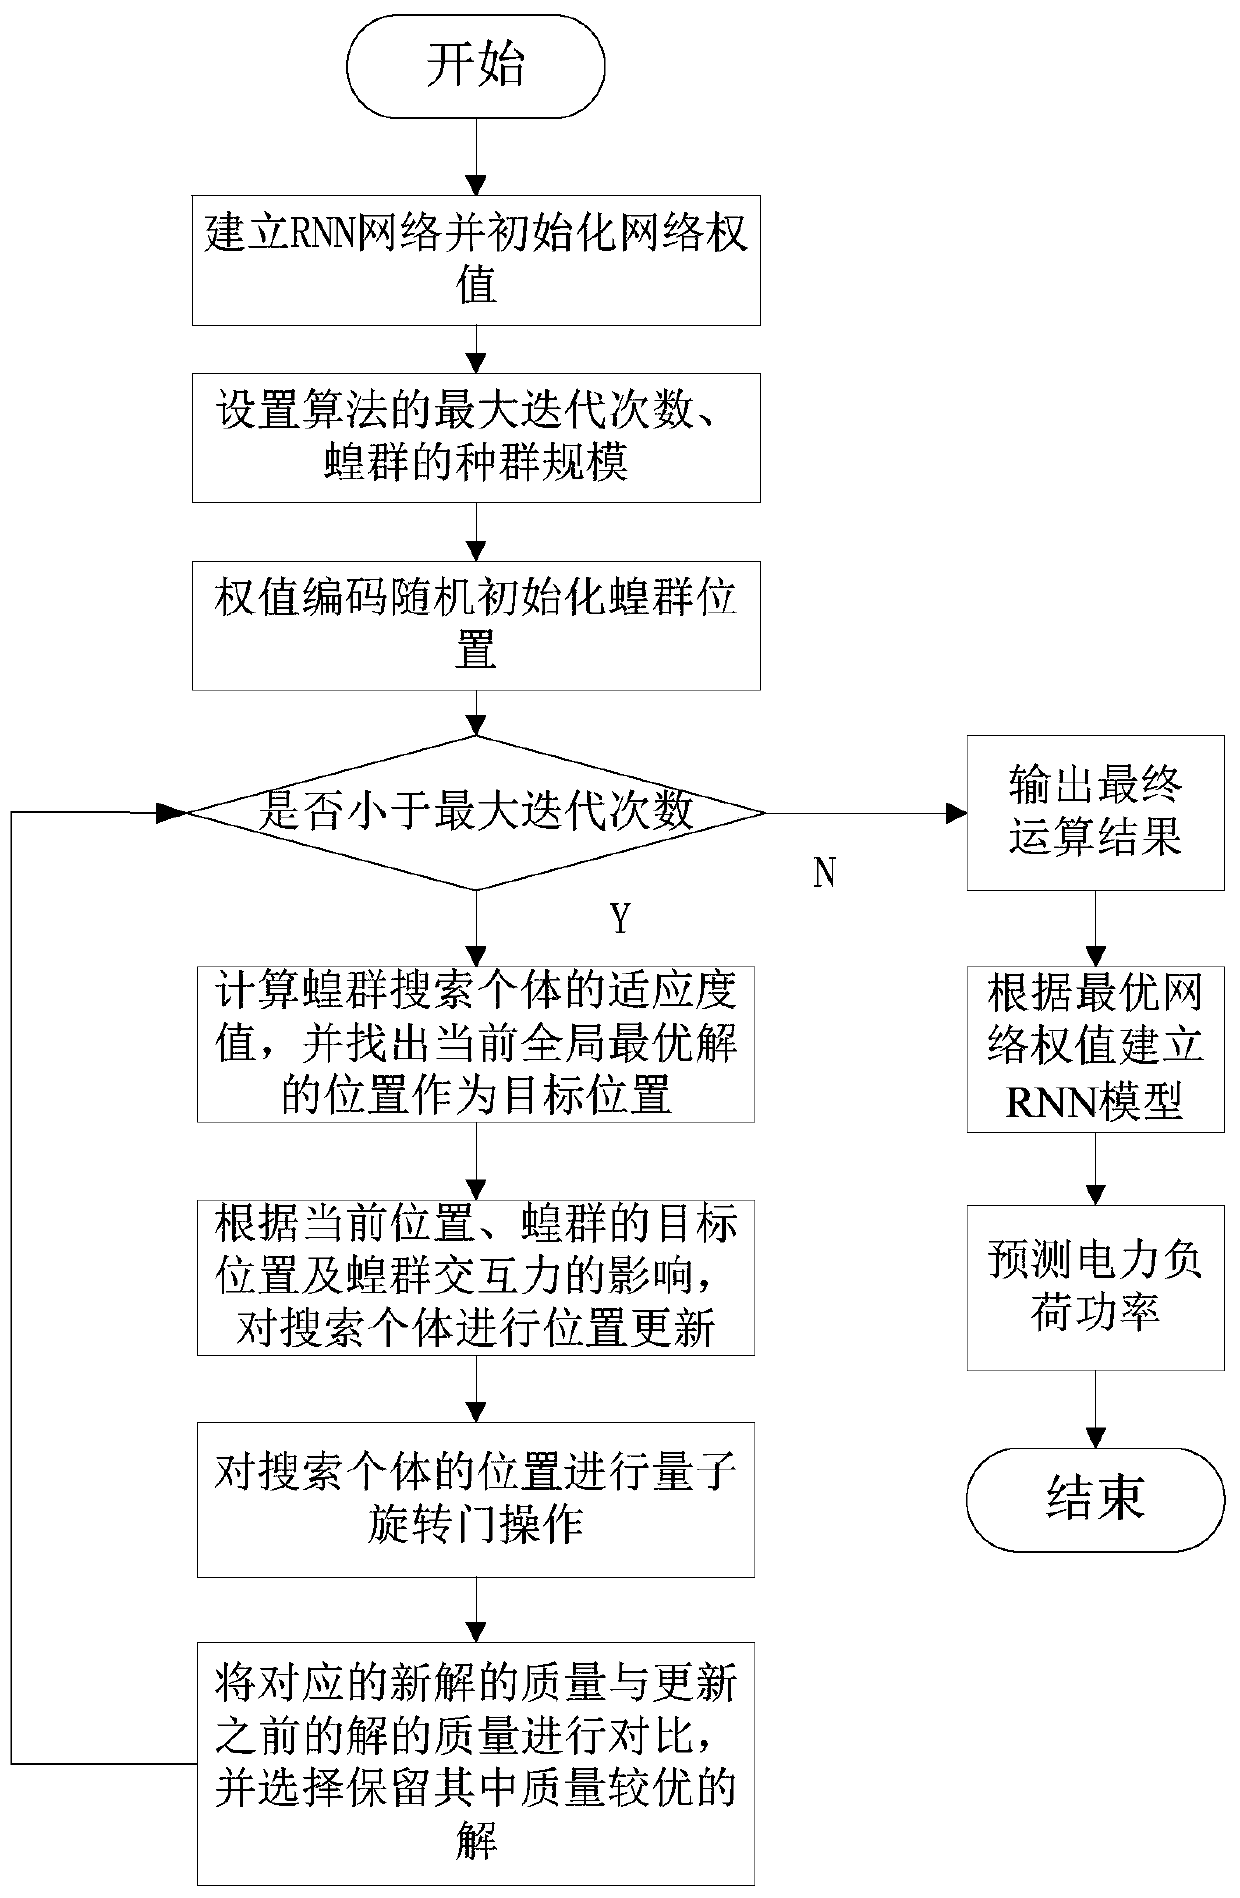 Regional power load prediction method and system